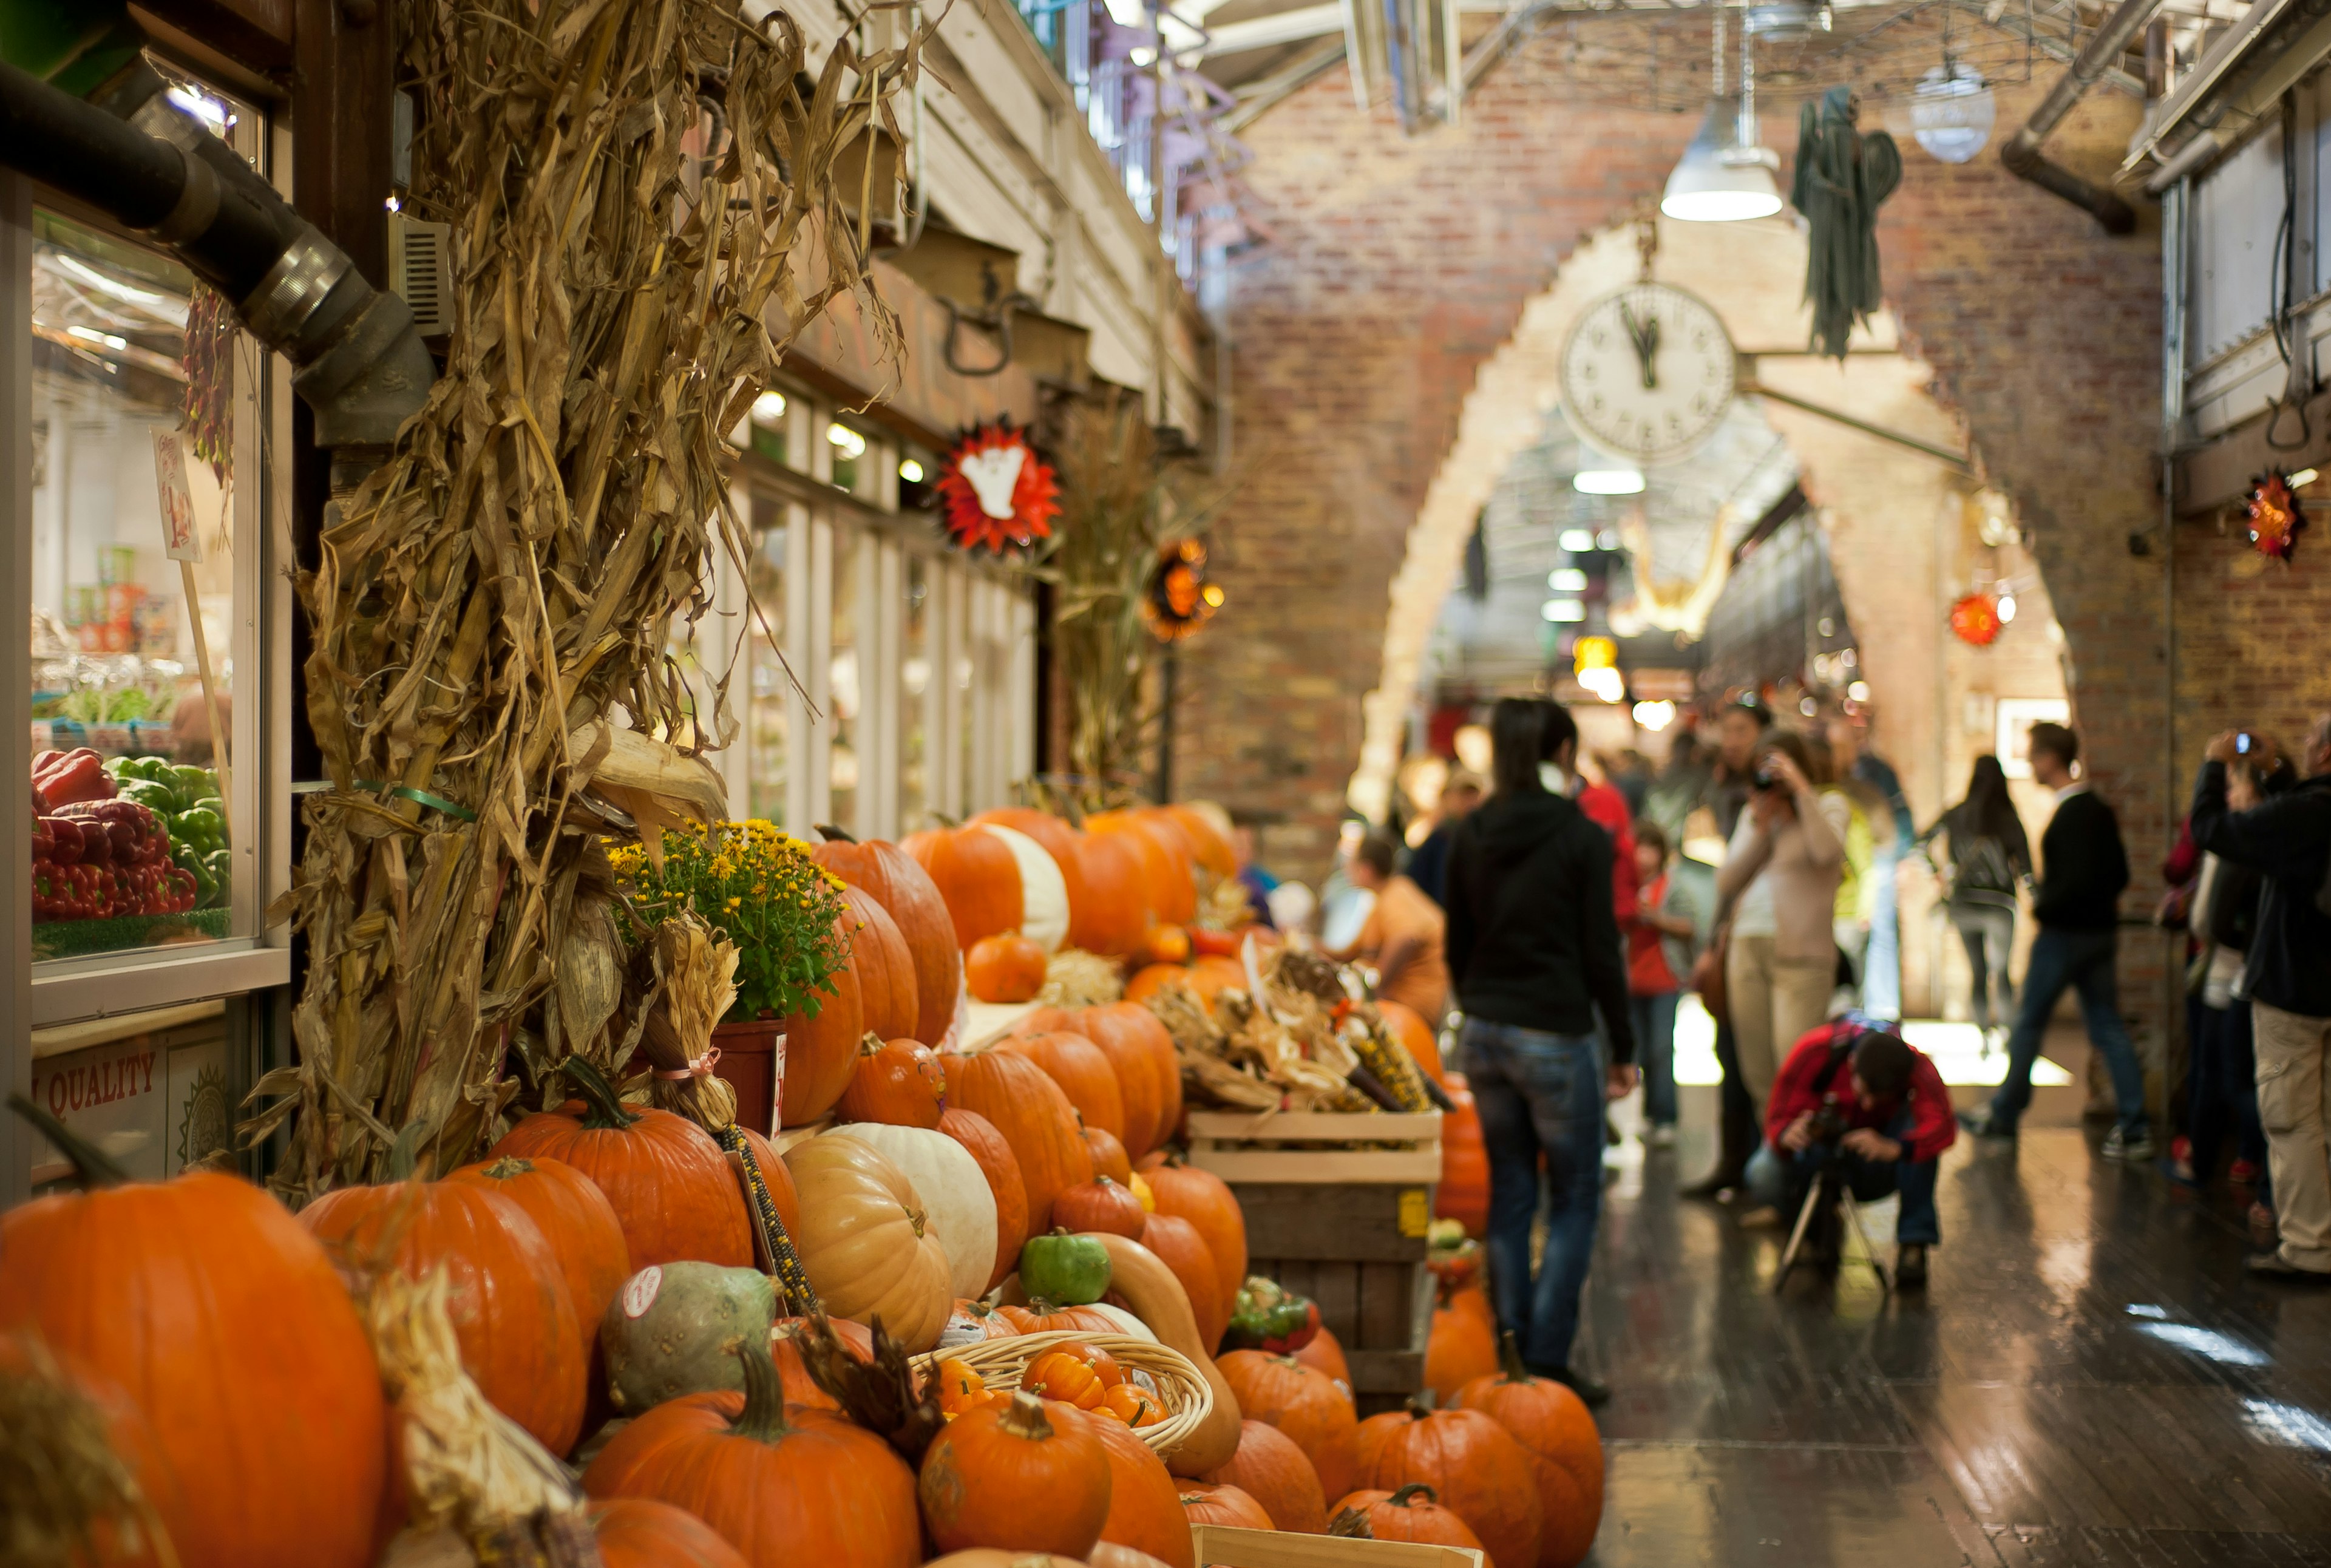 Food market in New York during the Halloween Holidays.